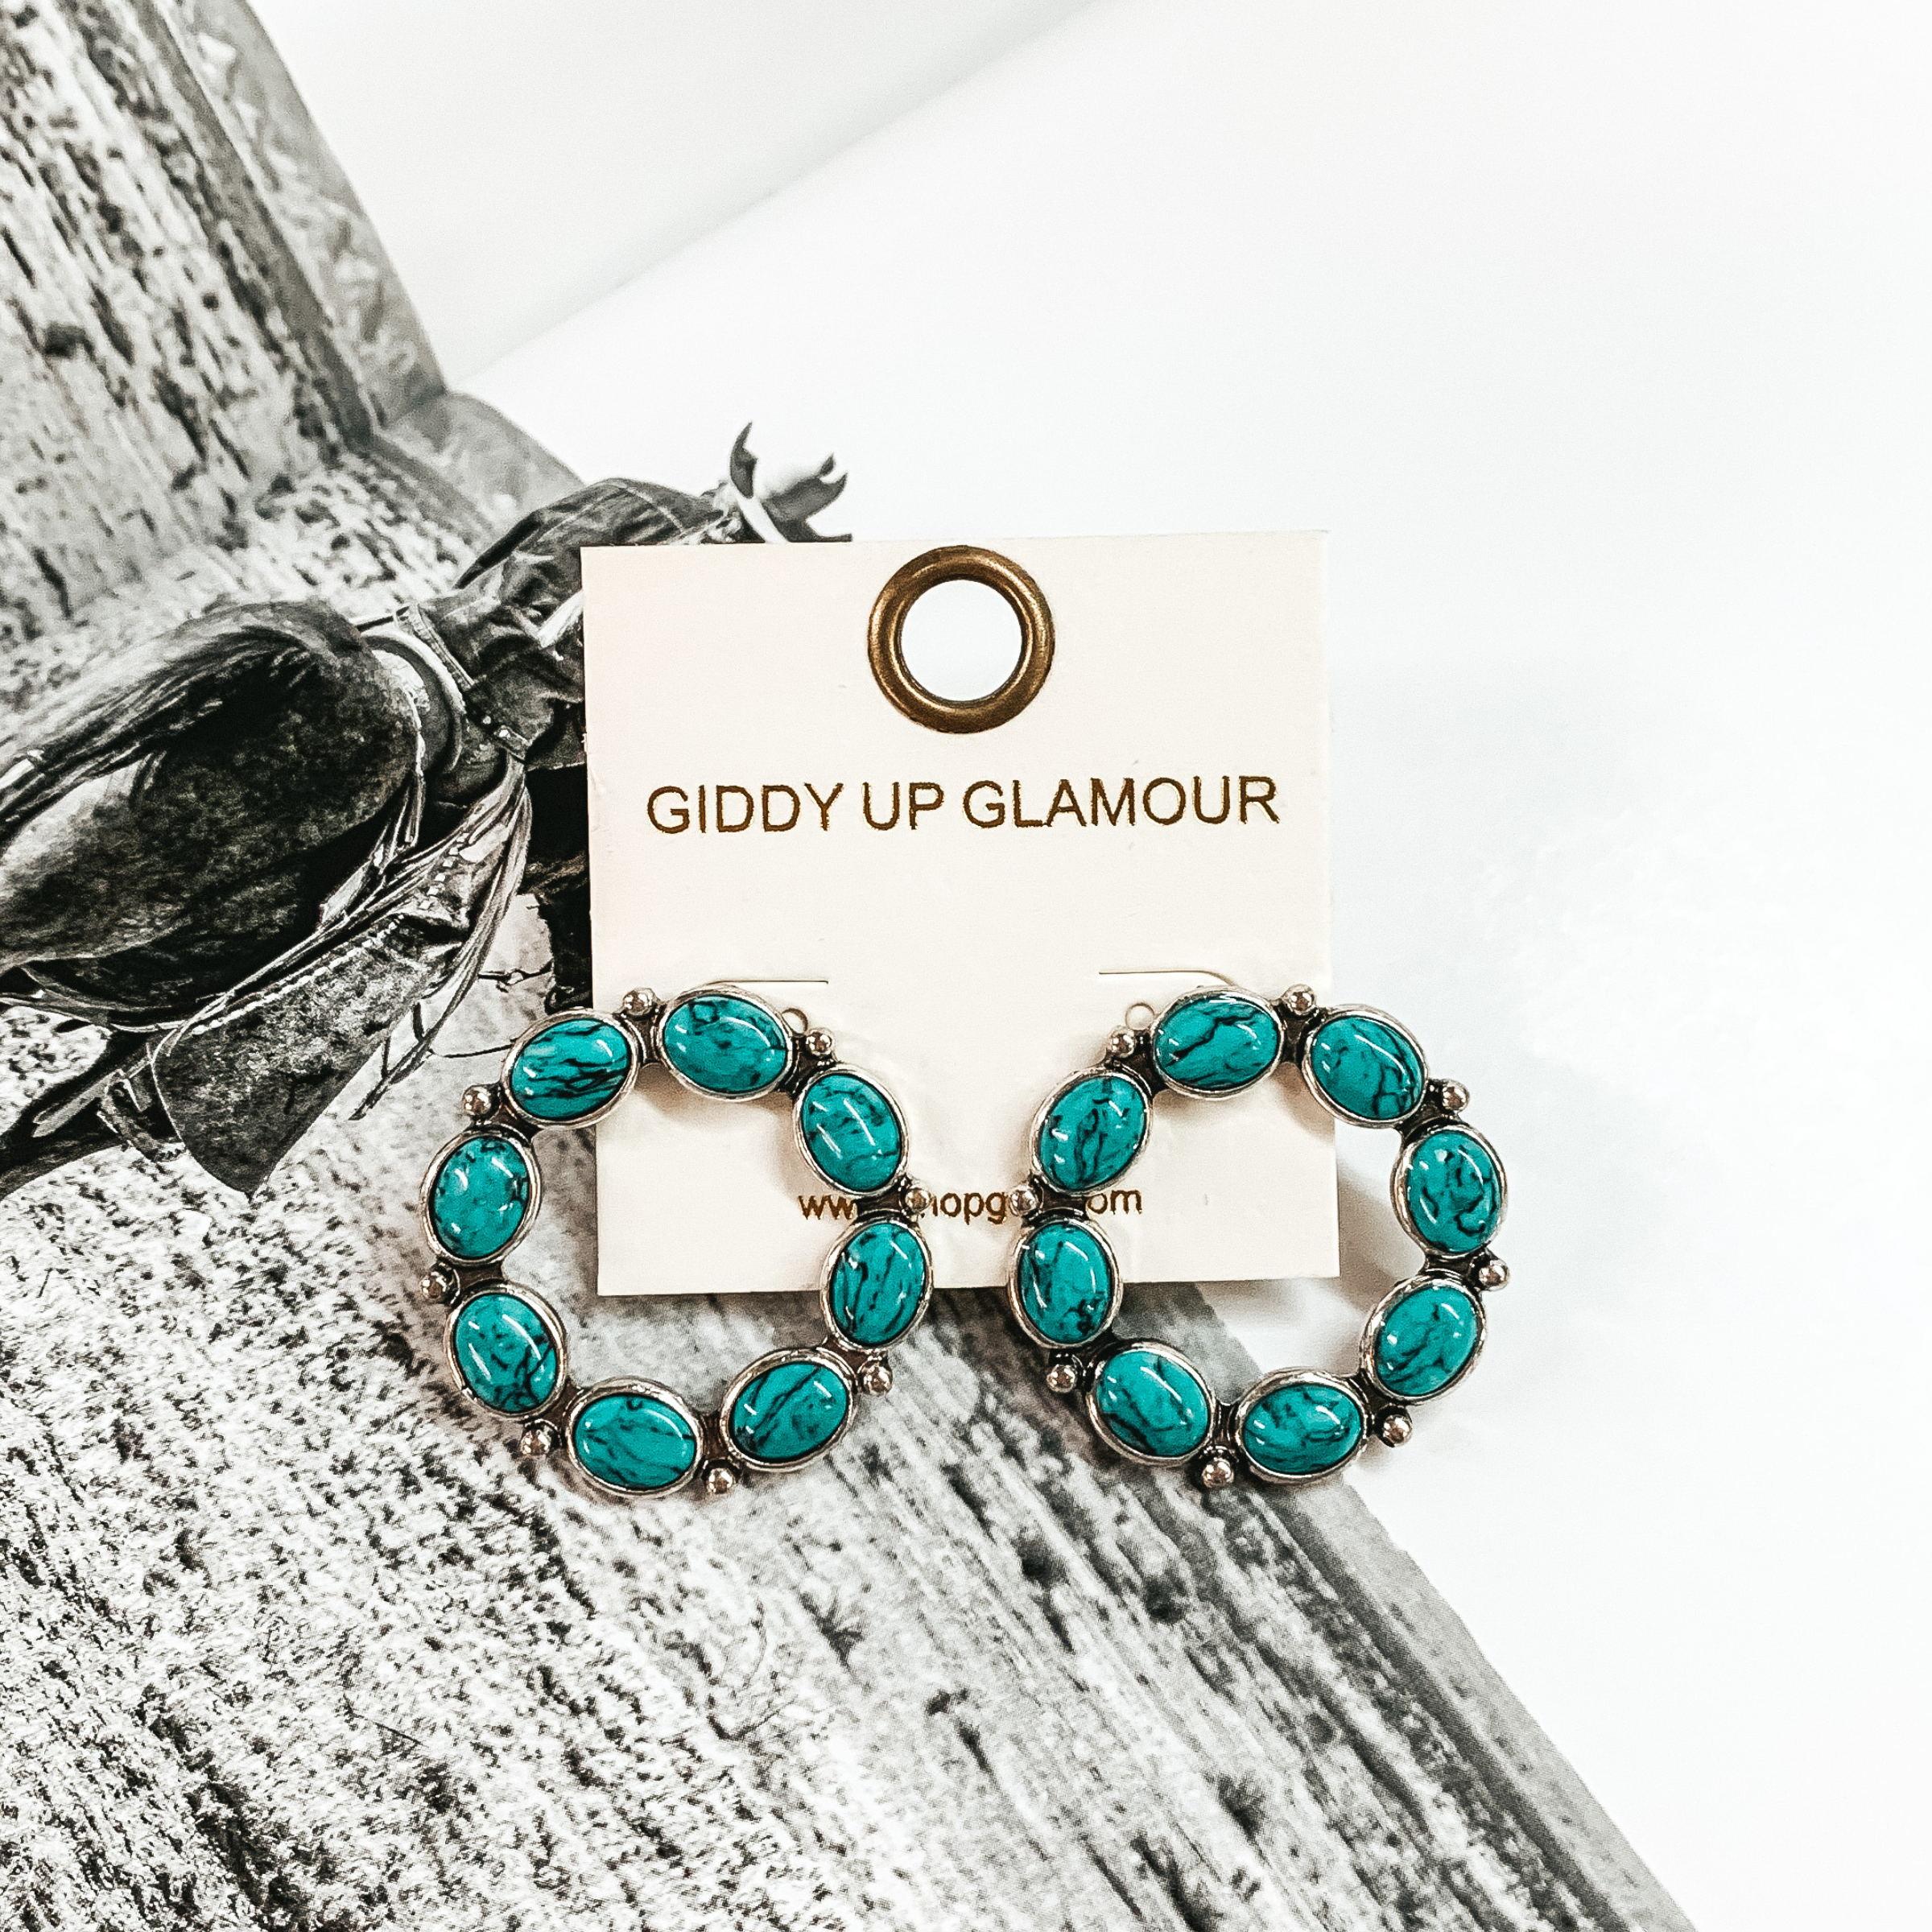 Open circle silver earrings that are outlined in turquoise stones. These earrings are pictured on a black and white picture. 